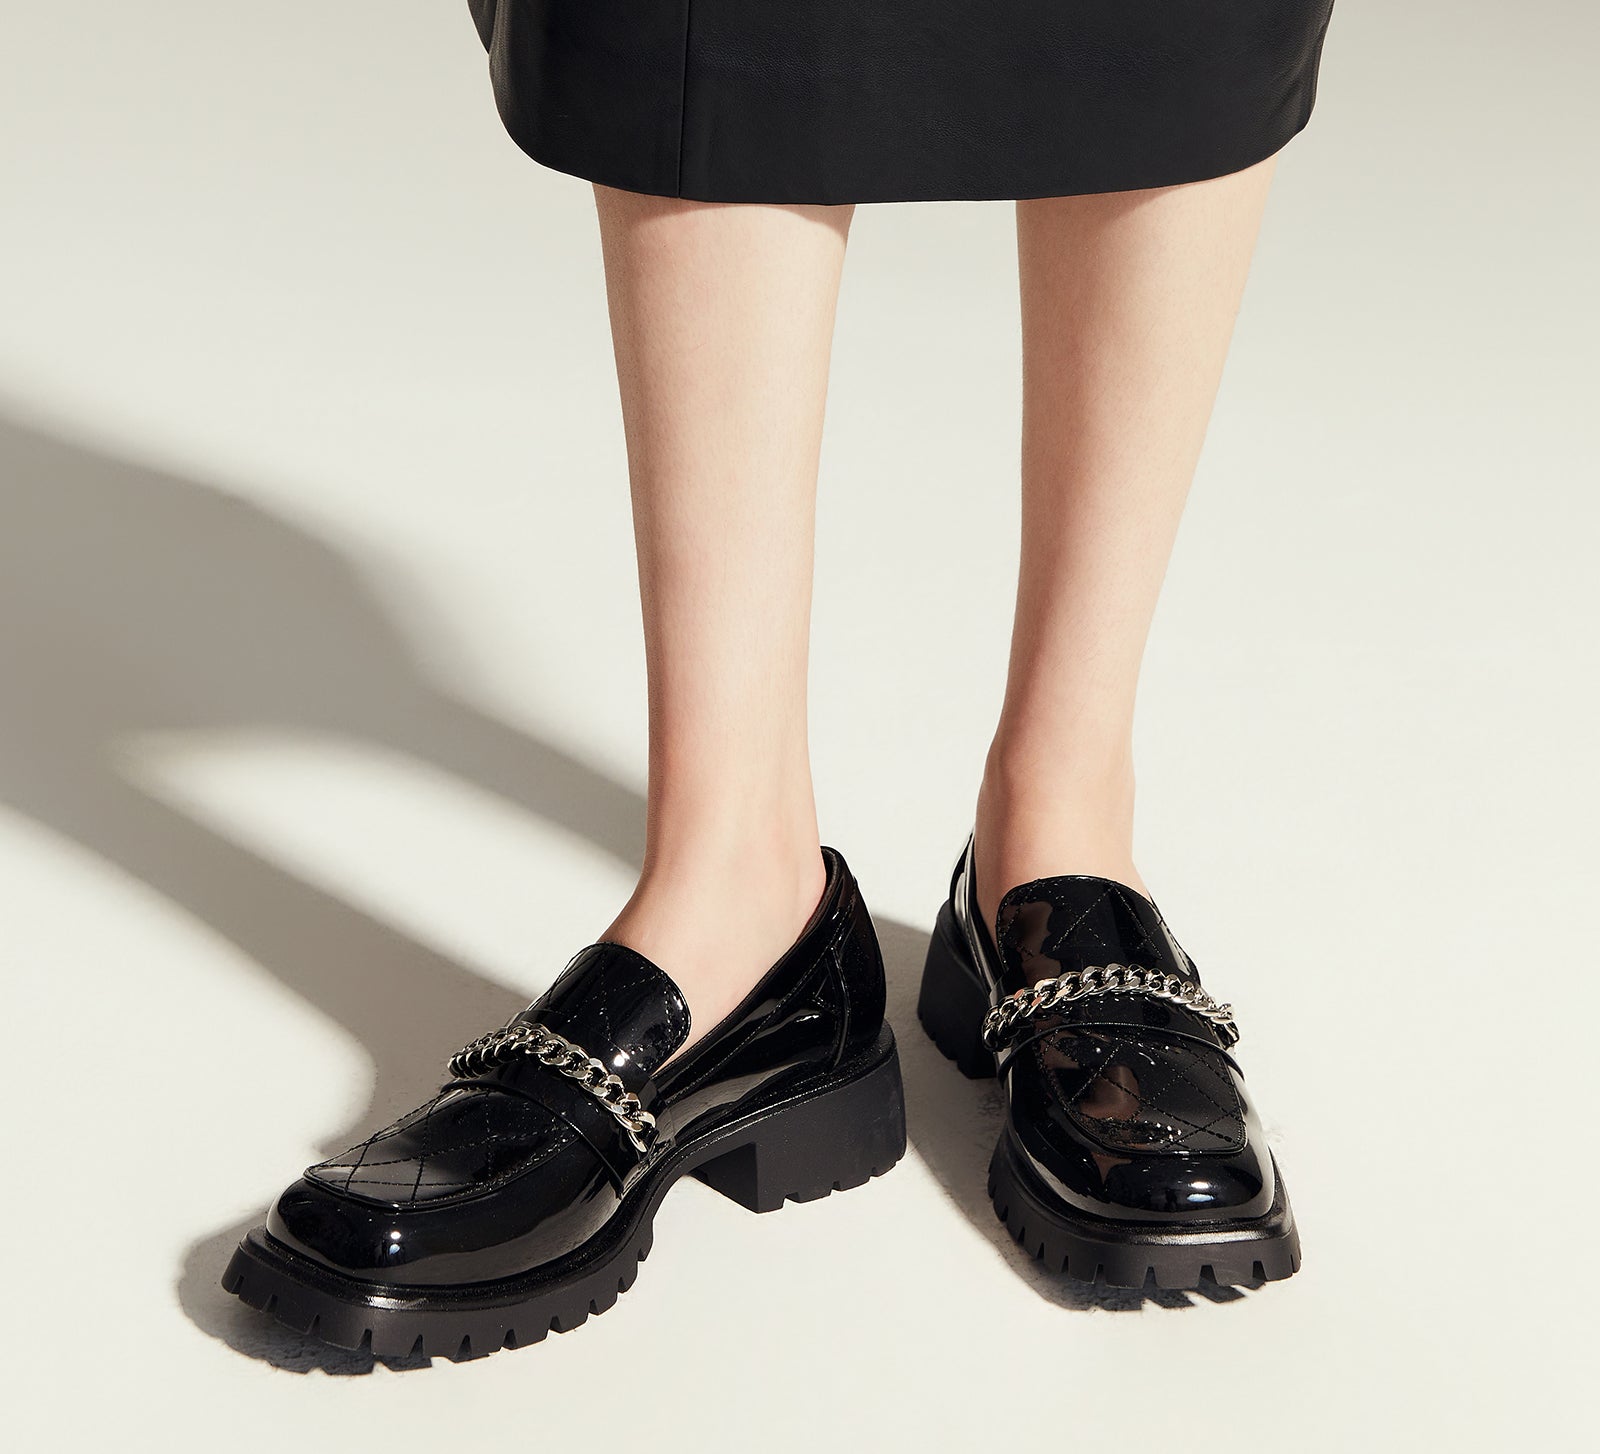  Metal Chain Platform Loafers in Black, a timeless and versatile option for everyday elegance